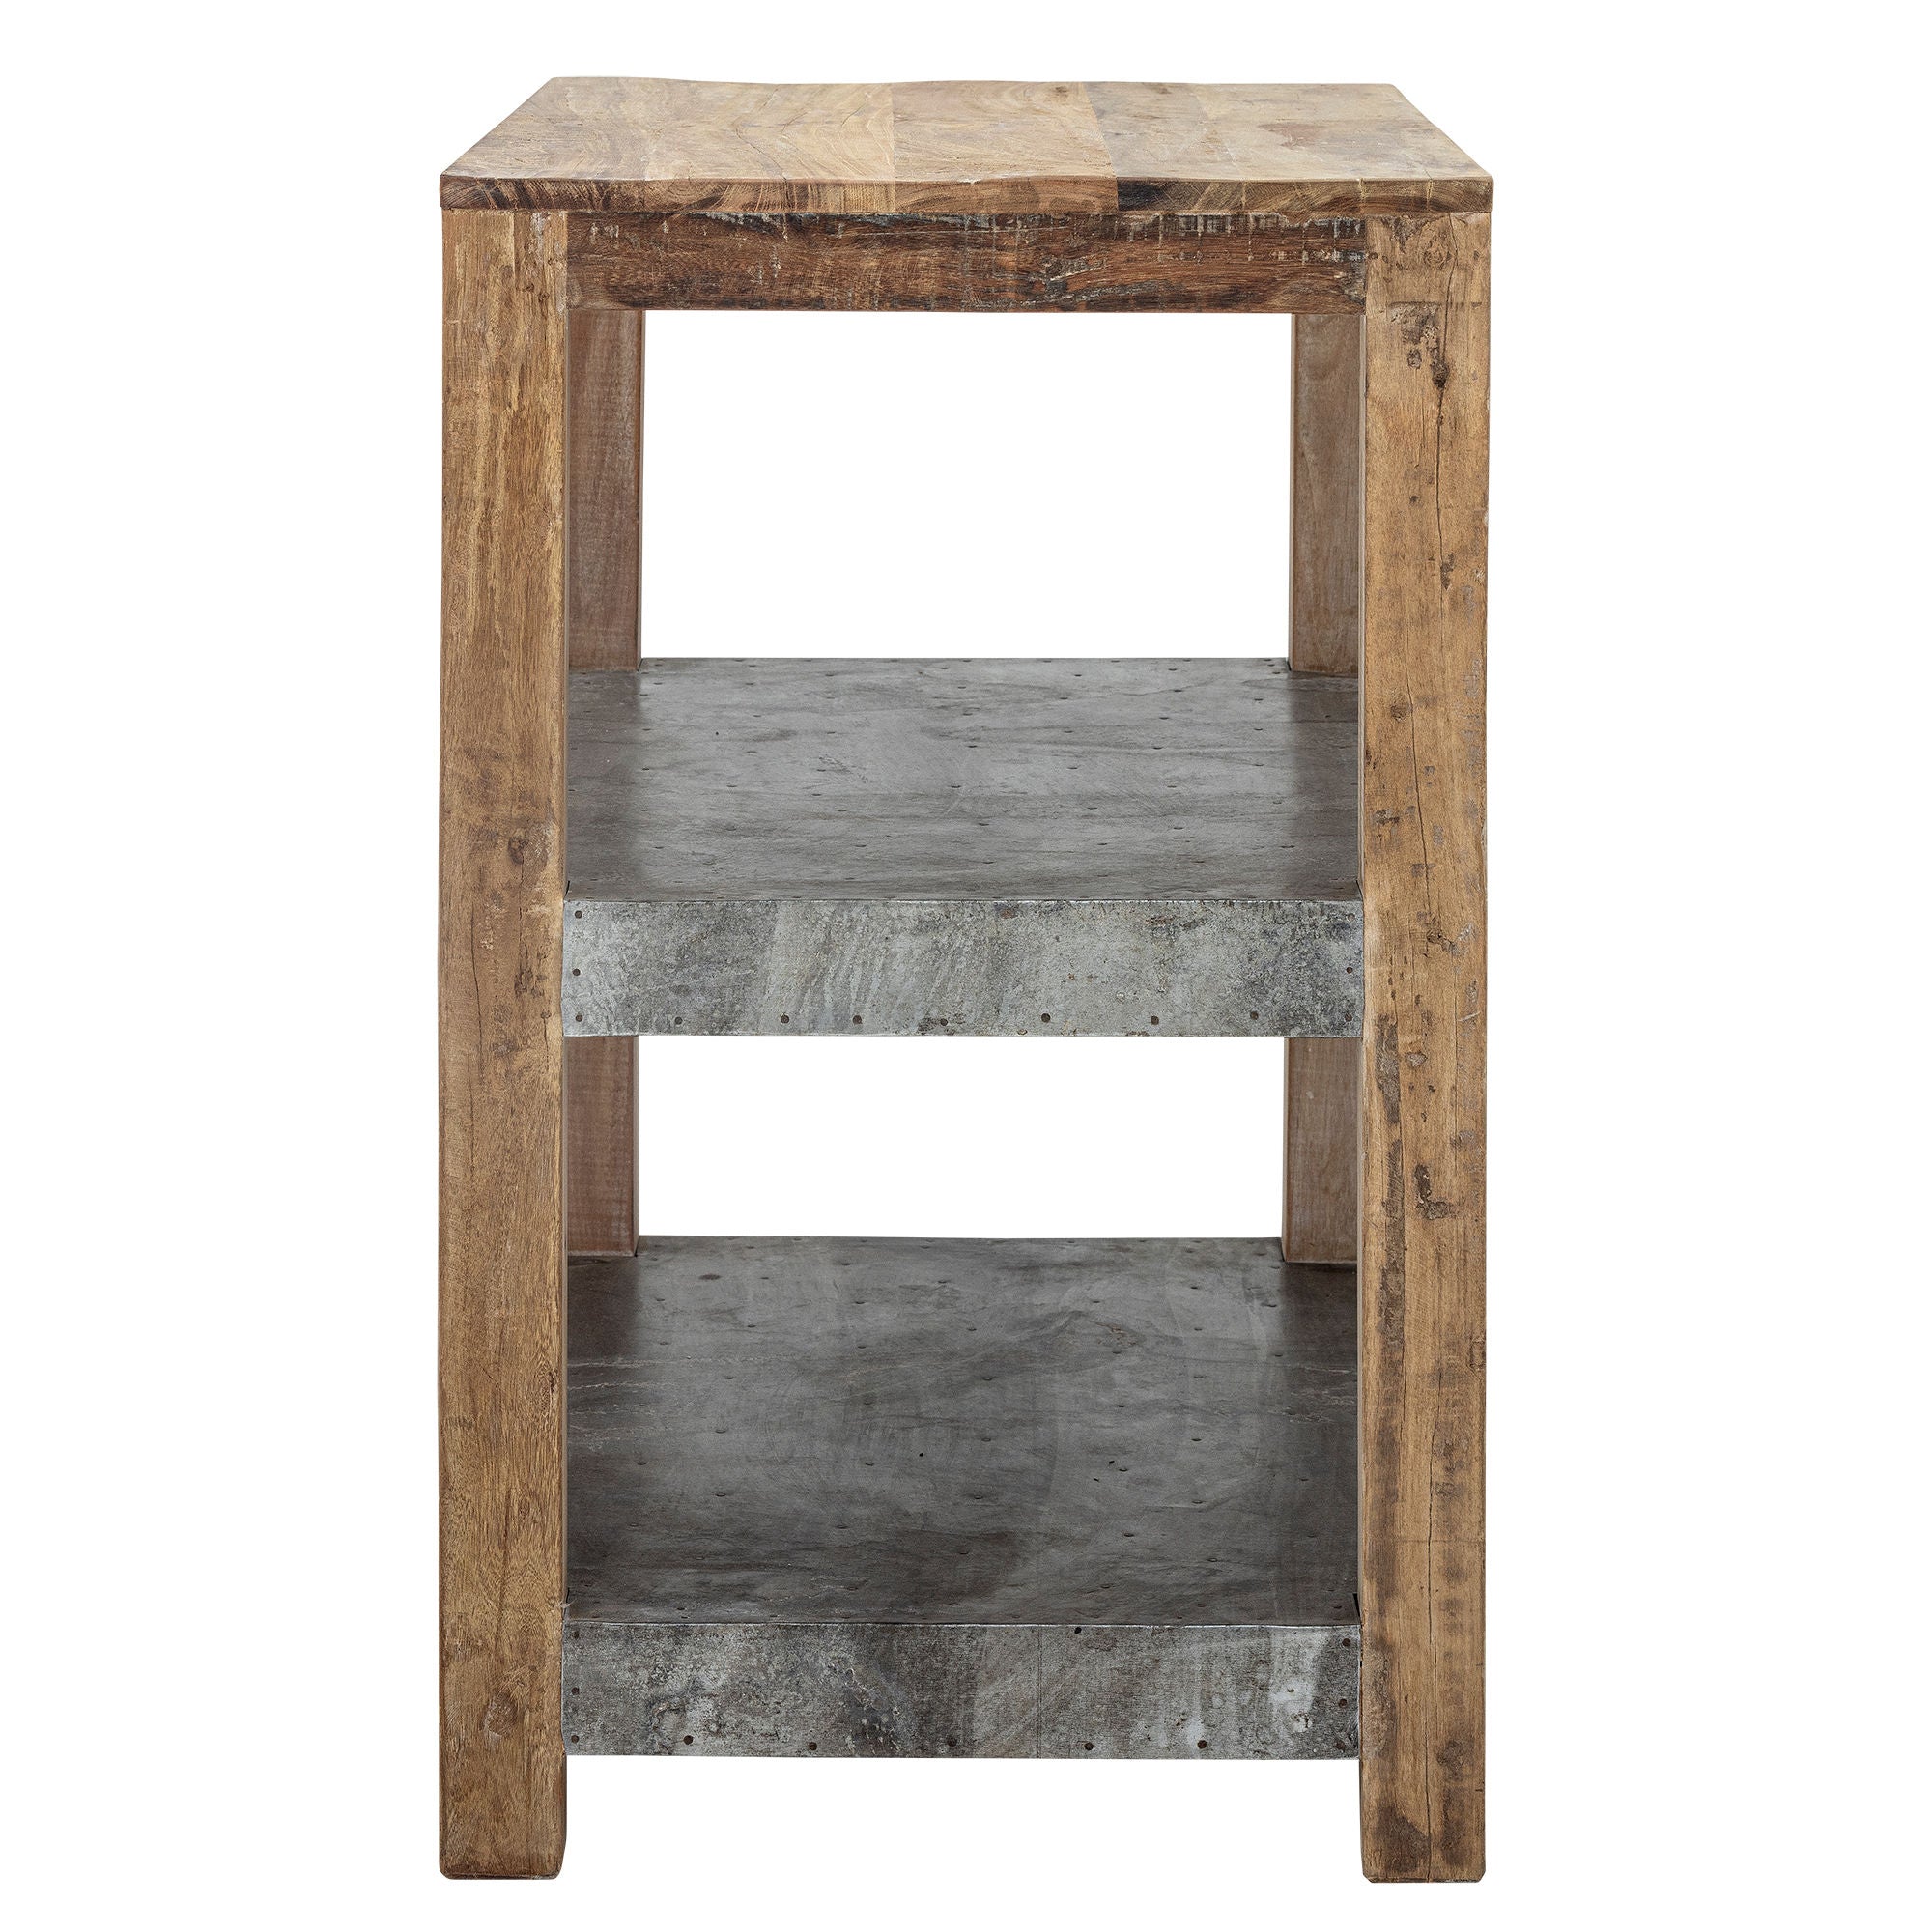 Creative Collection Reuben Bookcase, Brown, Reclaimed Wood